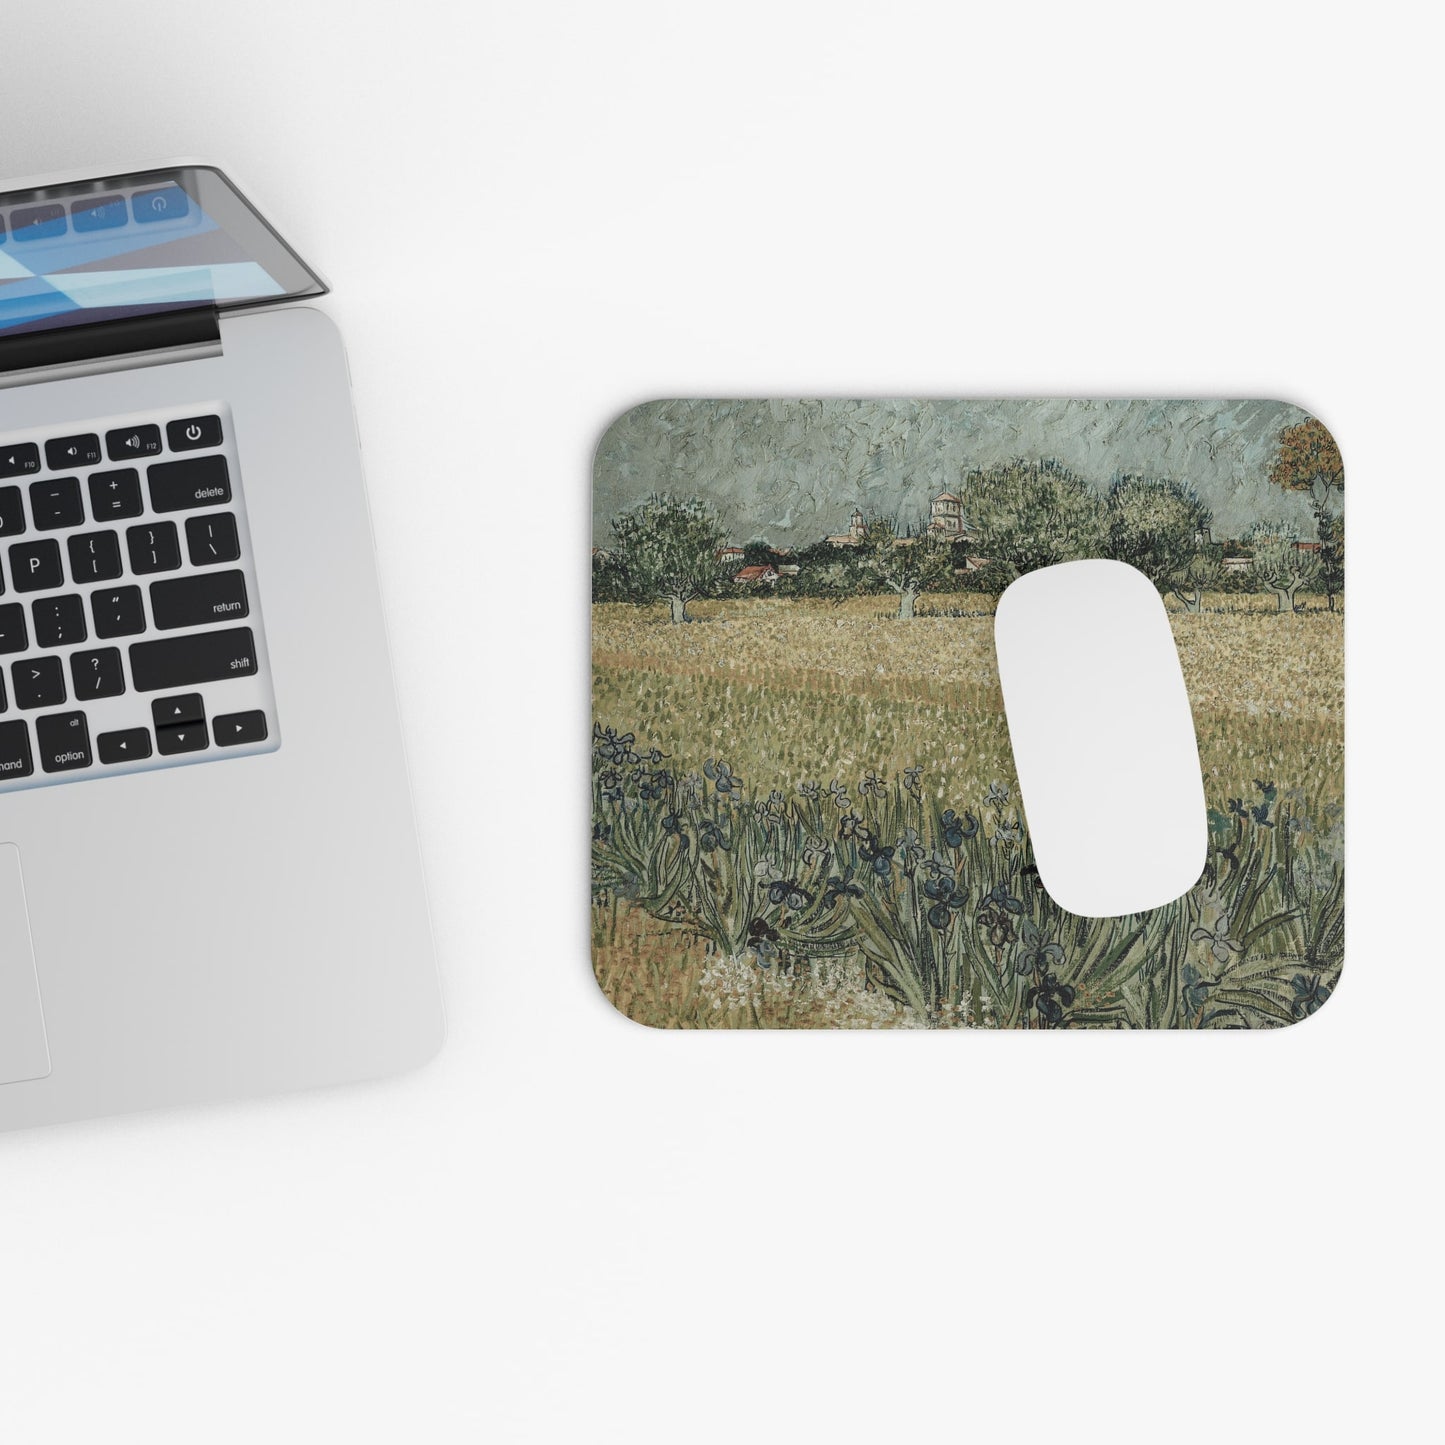 Vintage Muted Landscape Design Laptop Mouse Pad with White Mouse